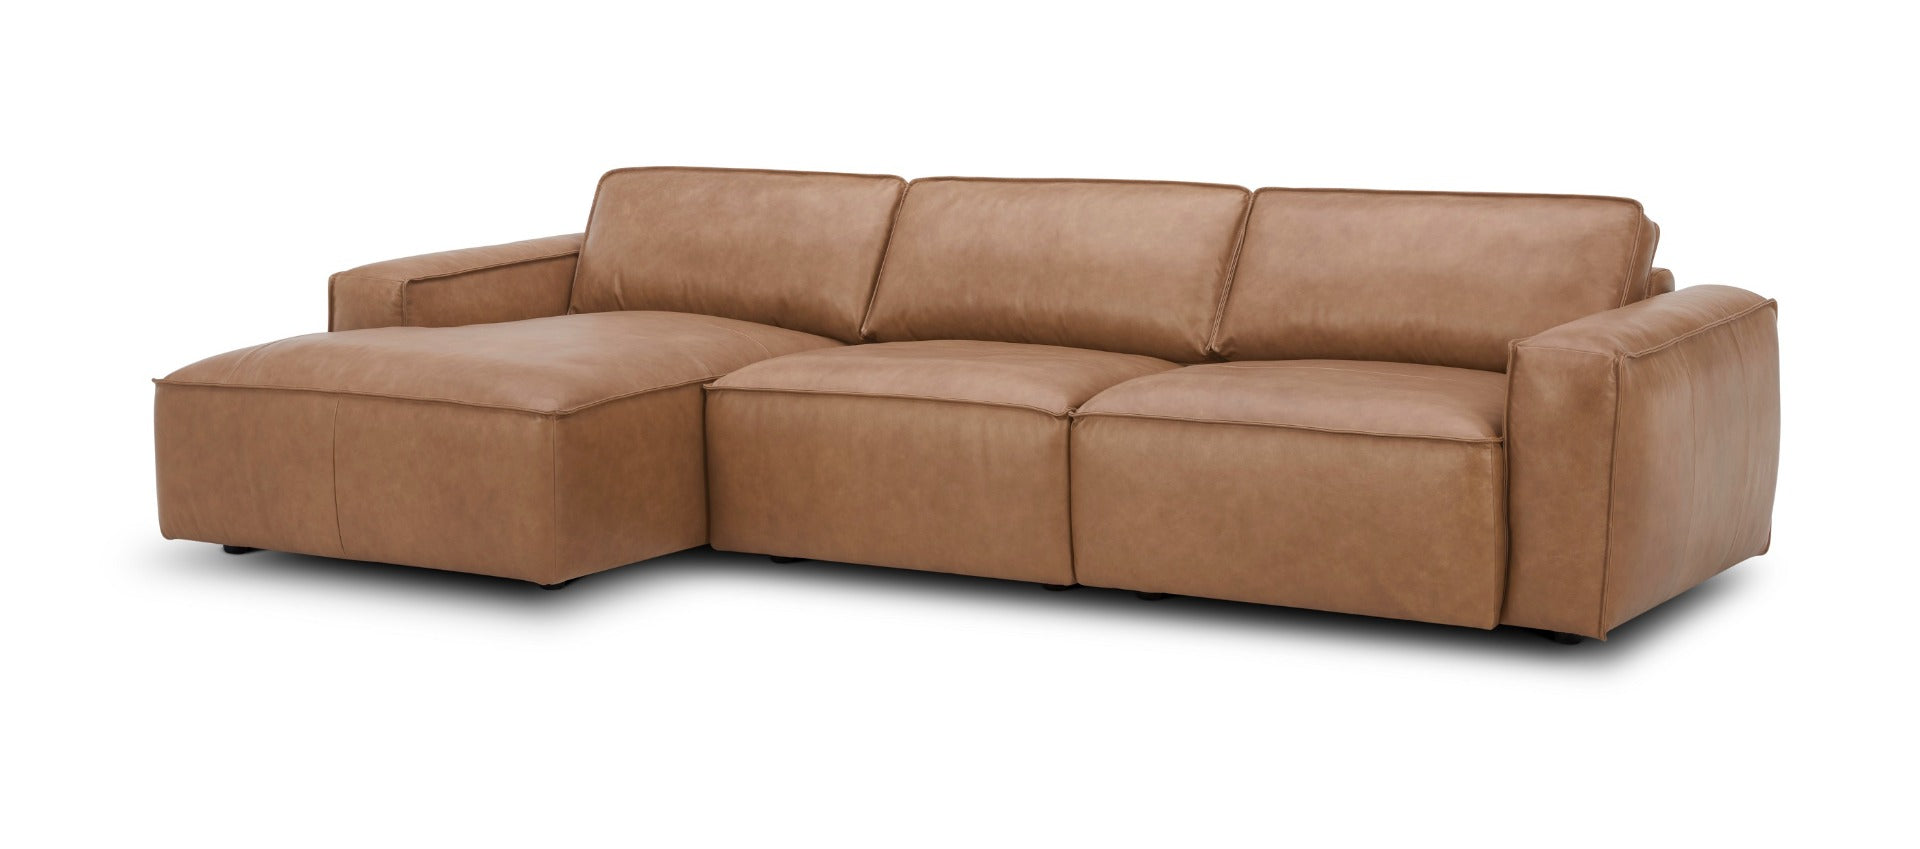 Modrest Cambria - Modern LAF Cognac Leather Sectional Sofa-Sectional Sofa-VIG-Wall2Wall Furnishings